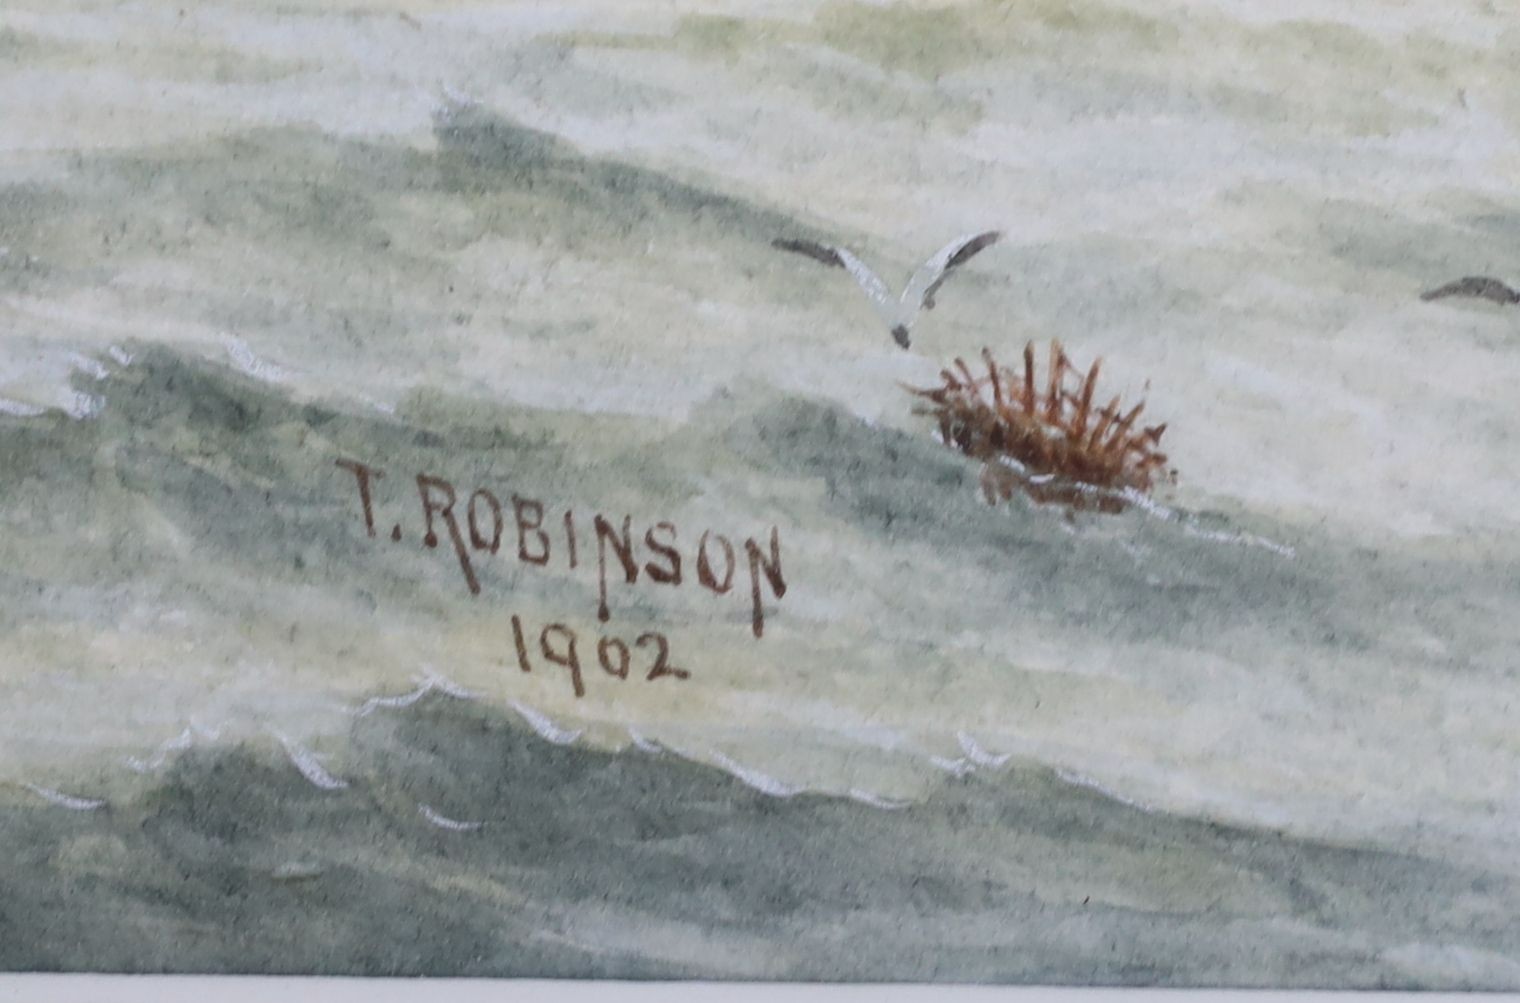 T. Robinson, watercolour, Ten gun warship at sea, signed and dated 1902, 25 x 33cm